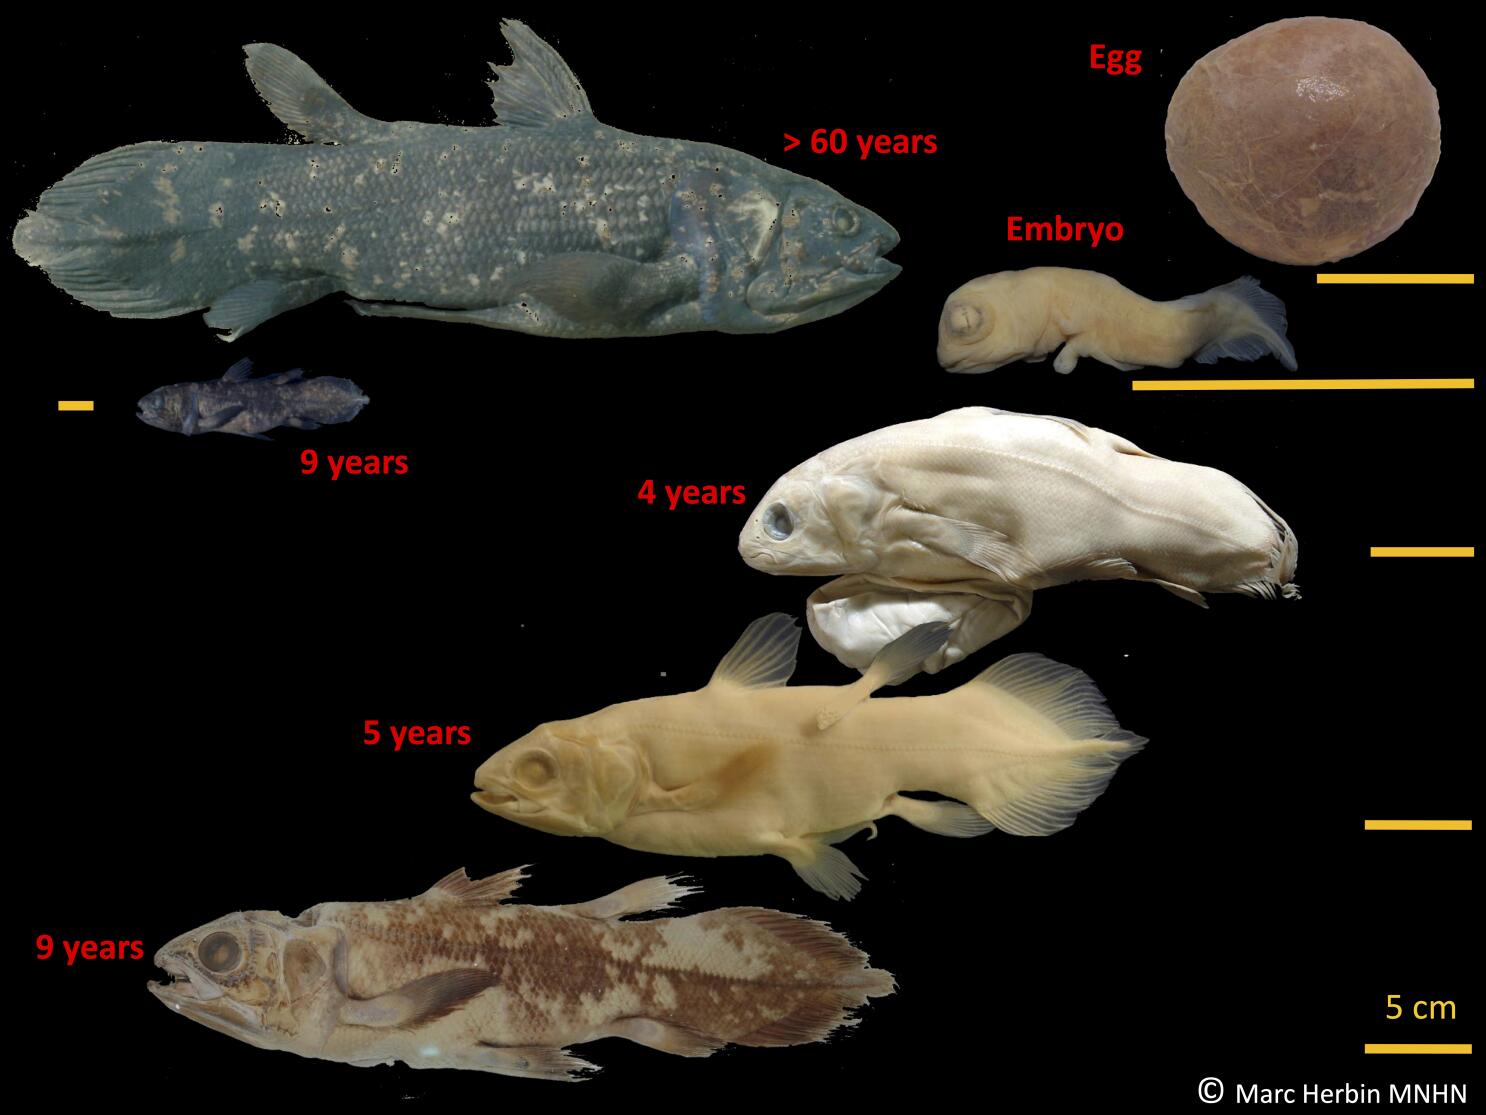 Mysterious 'living fossil' coelacanth fish can survive for 100